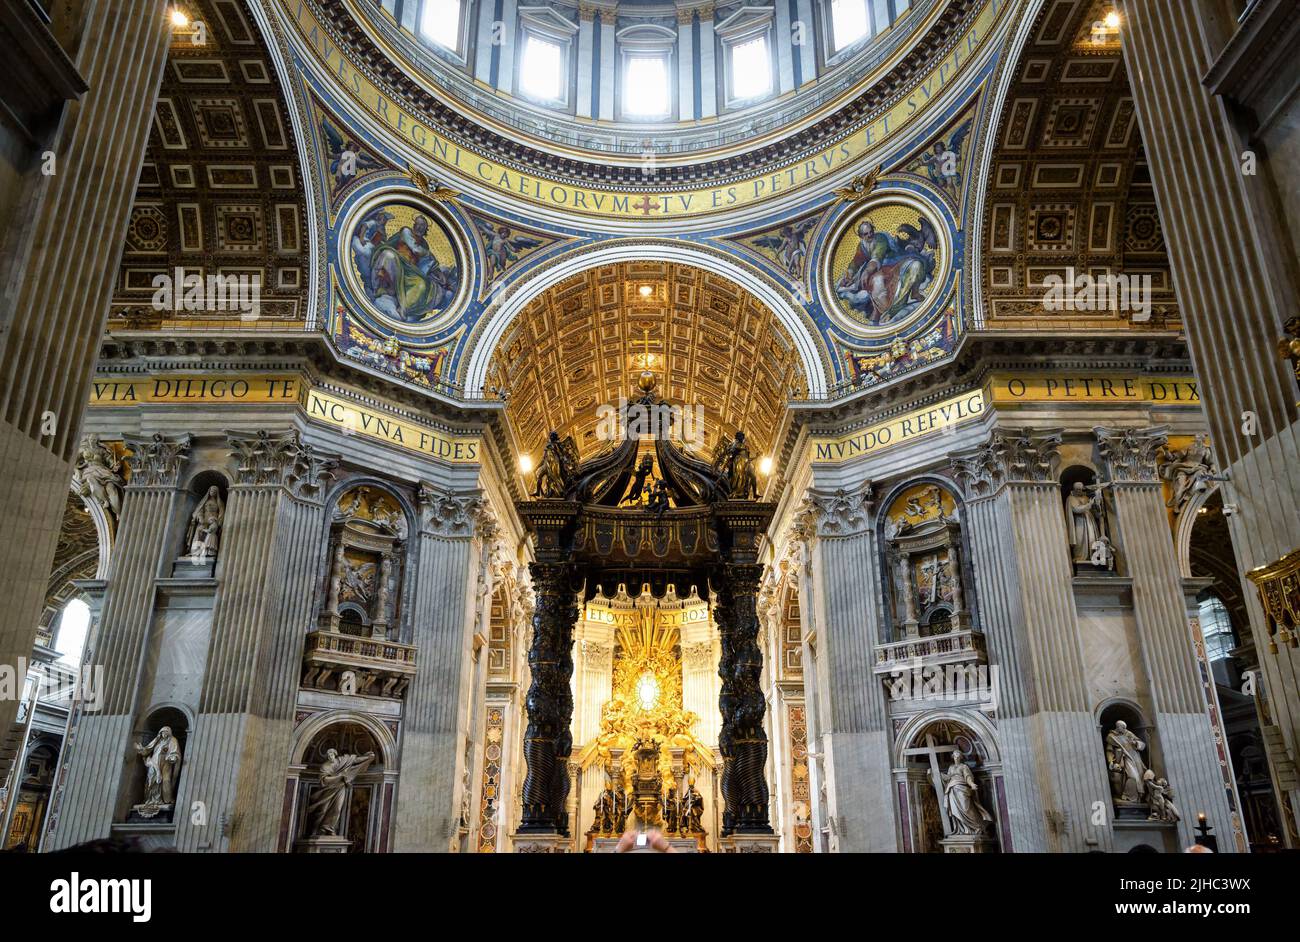 Rome - Jun 12, 2021: Inside St Peter Basilica, Rome, Italy. Saint Peters cathedral is top landmark of Rome and Vatican City. Ornate Baroque interior o Stock Photo